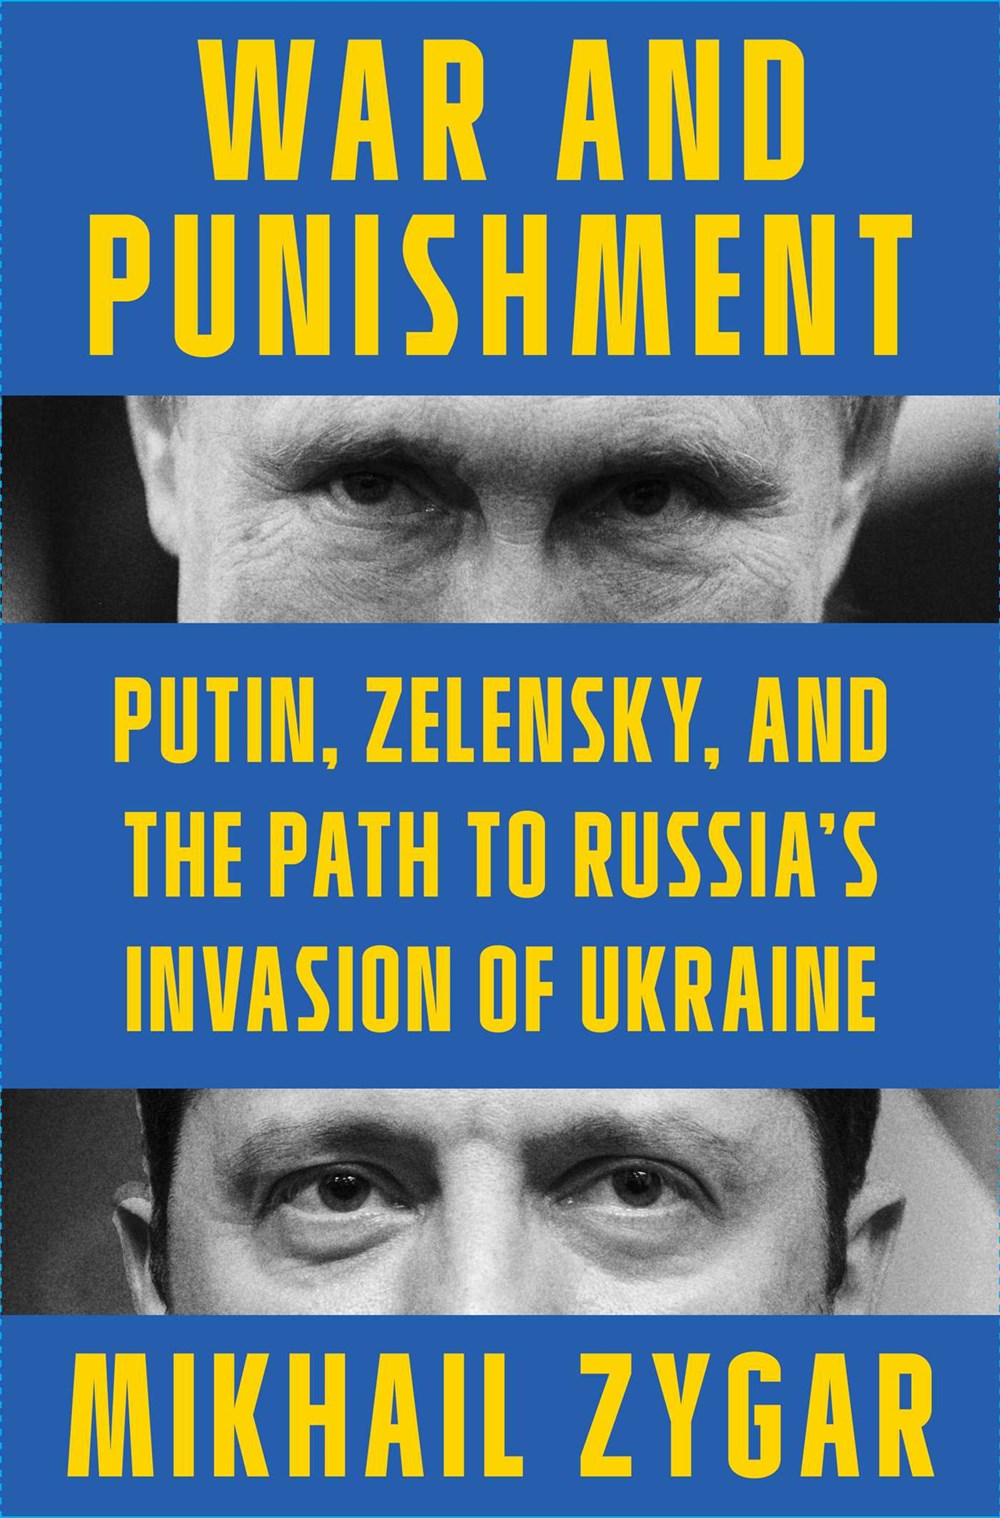 War and Punishment: Putin, Zelensky, and the Path to Russia’s Invasion of Ukraine